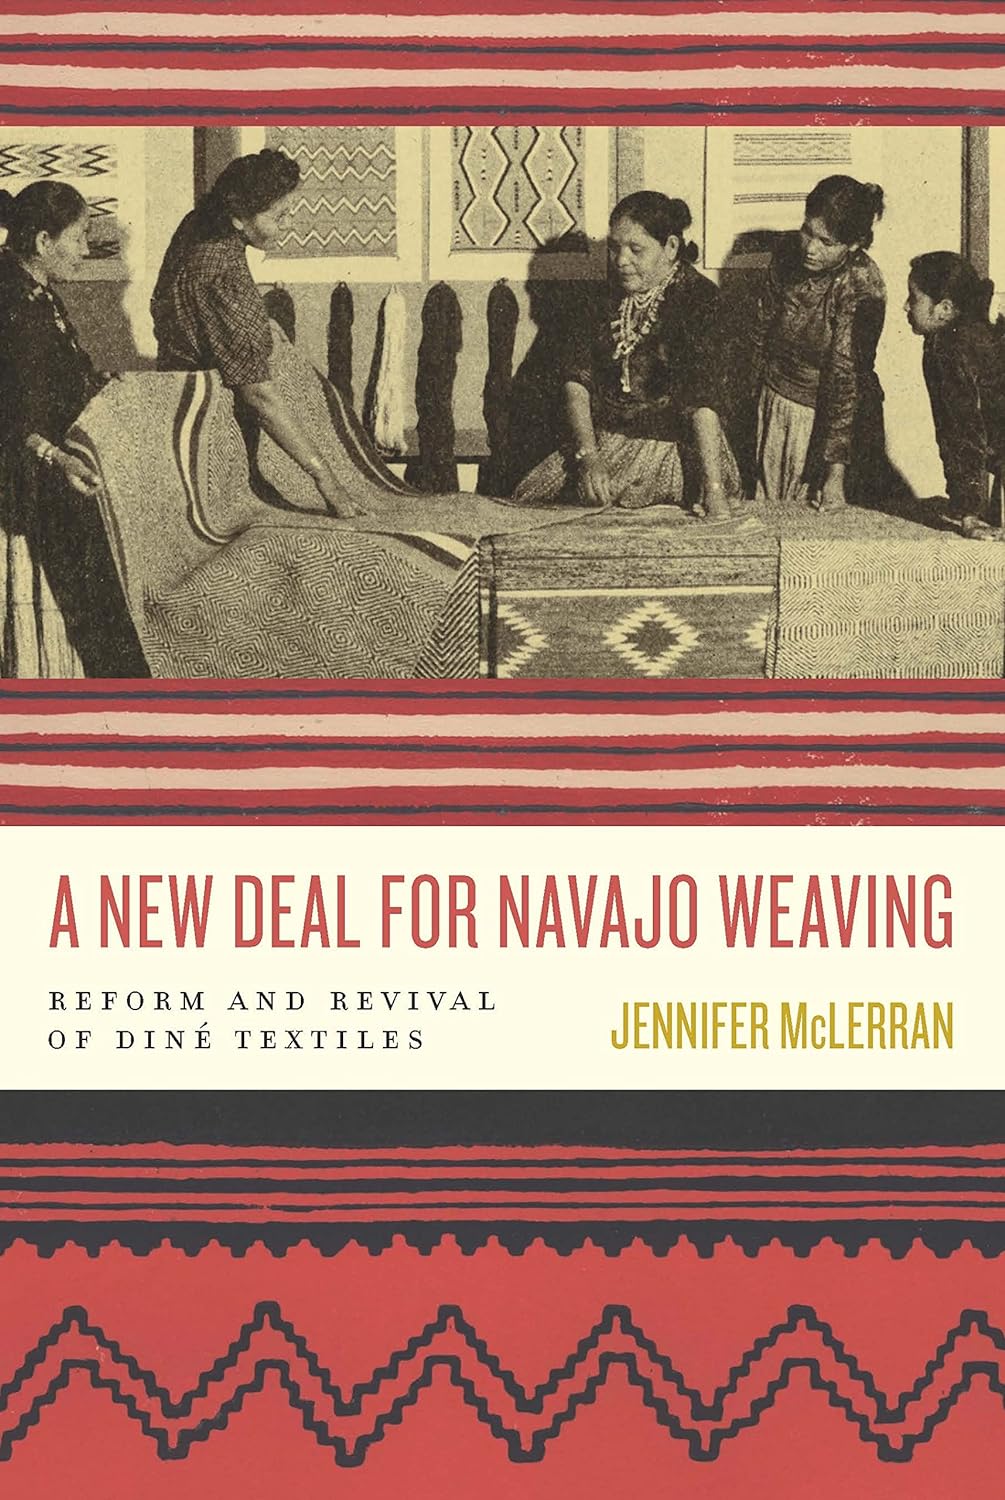 A New Deal for Navajo Weaving: Reform and Revival of Diné Textiles by Jennifer McLerran